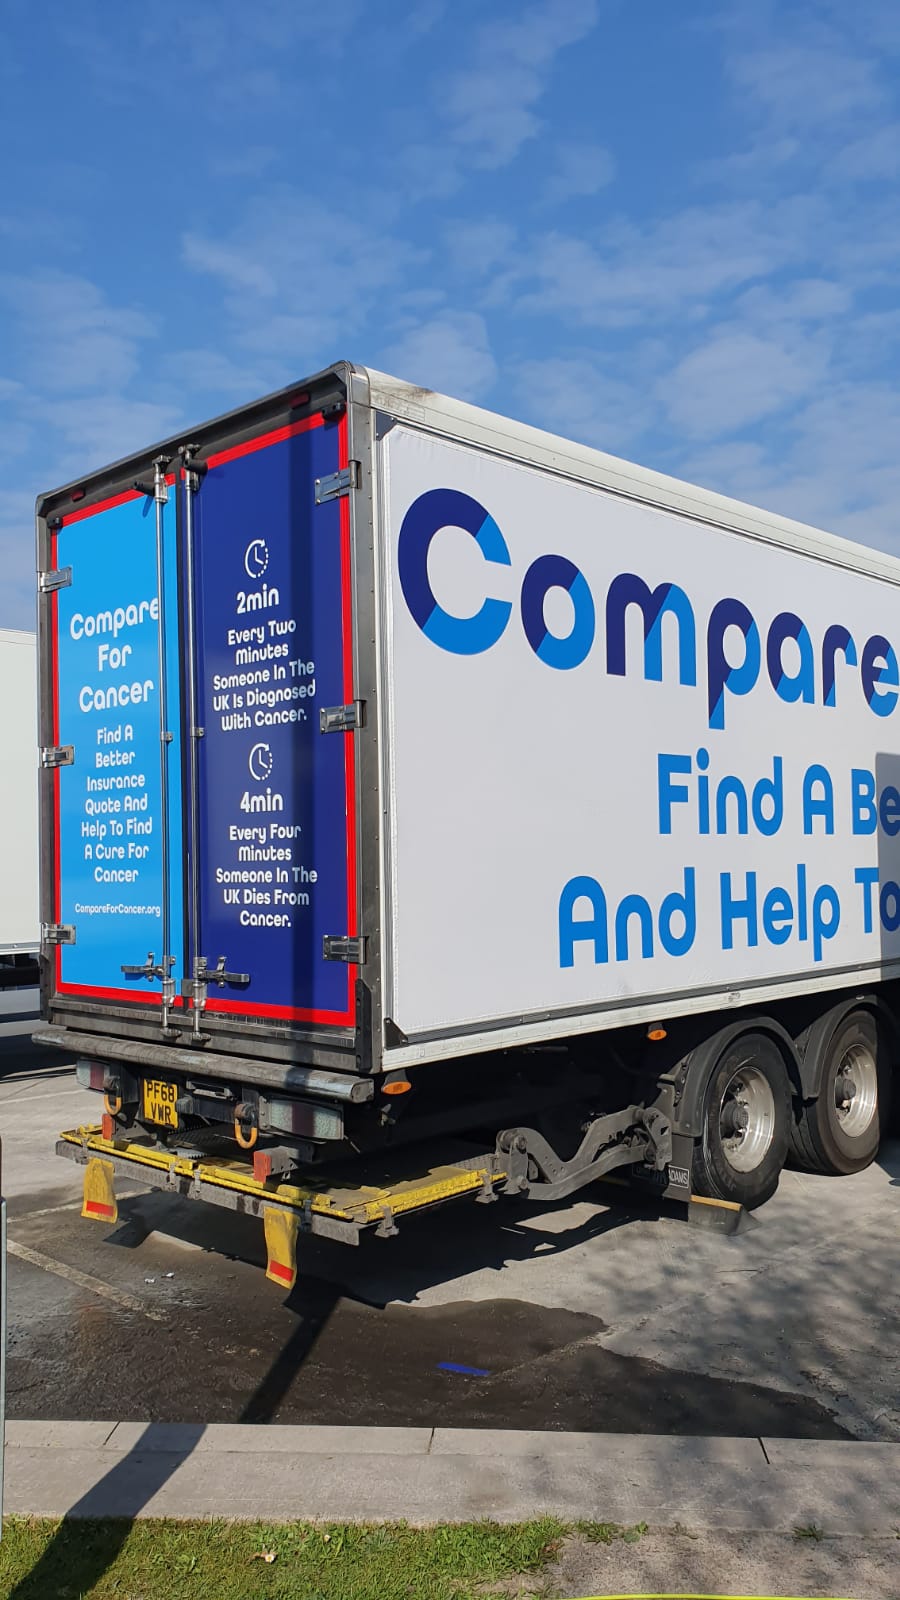 Compare For Cancer - Truck Advertising | Lorry graphics | Truck Wrap | Commercial truck and lorry signage